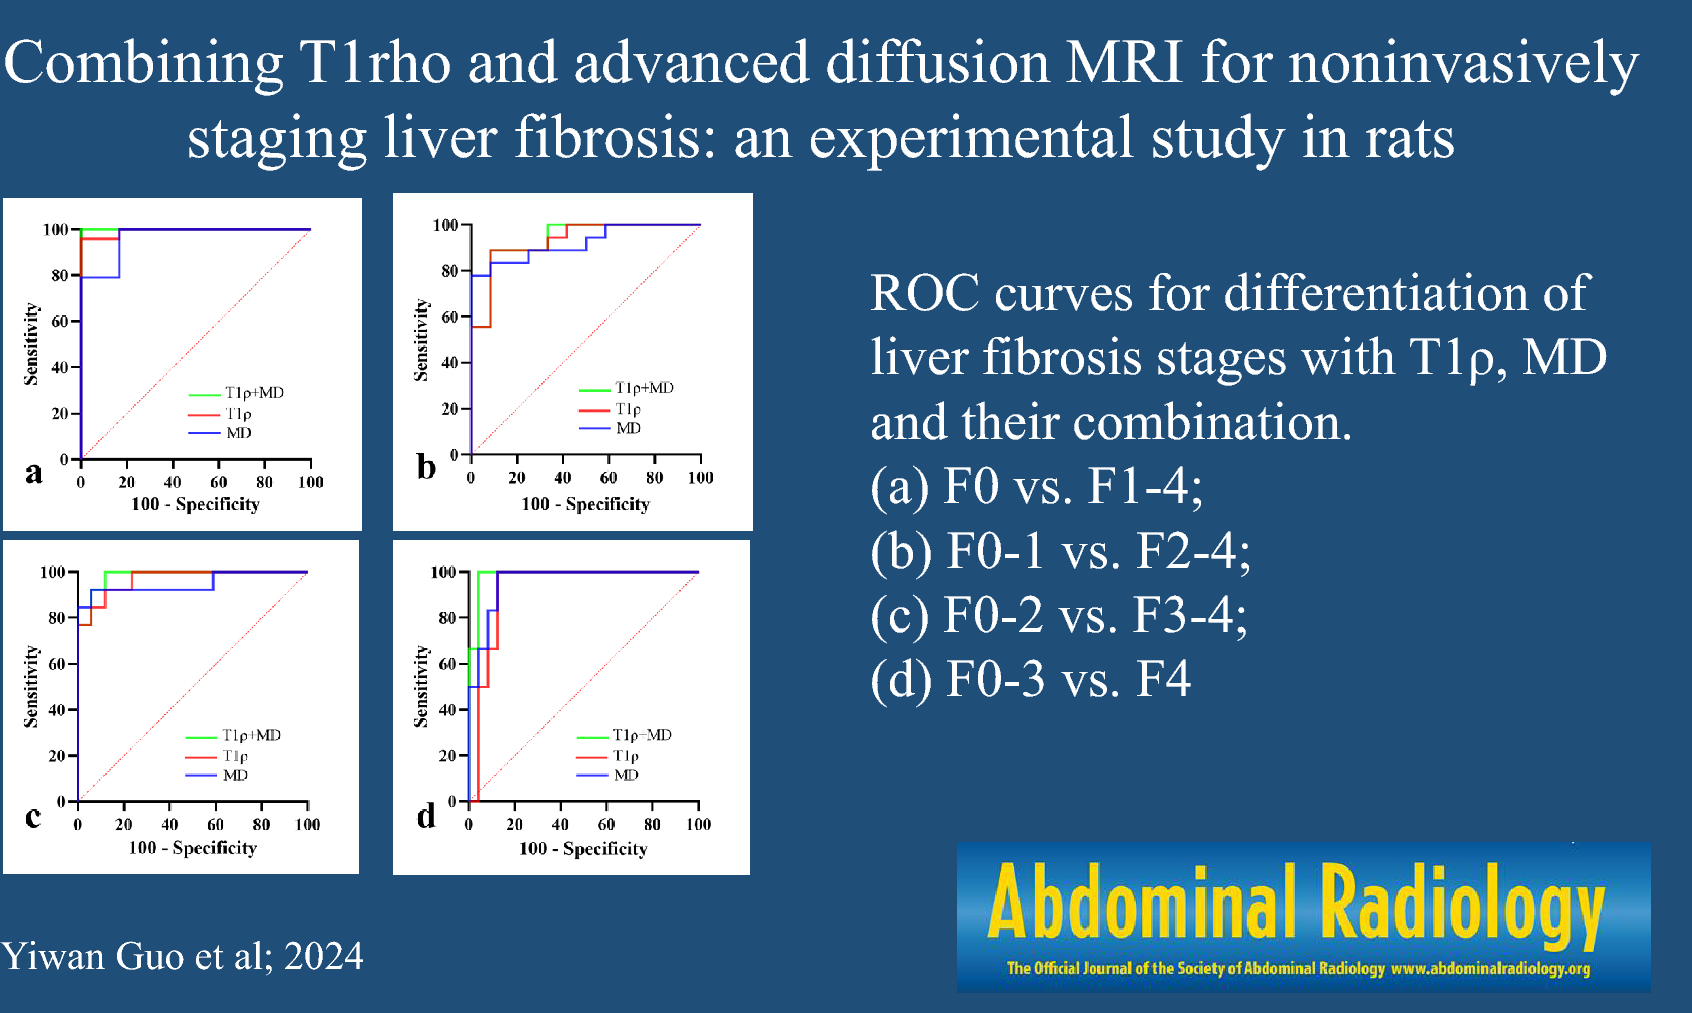 Combining T1rho and advanced diffusion MRI for noninvasively staging liver fibrosis: an experimental study in rats